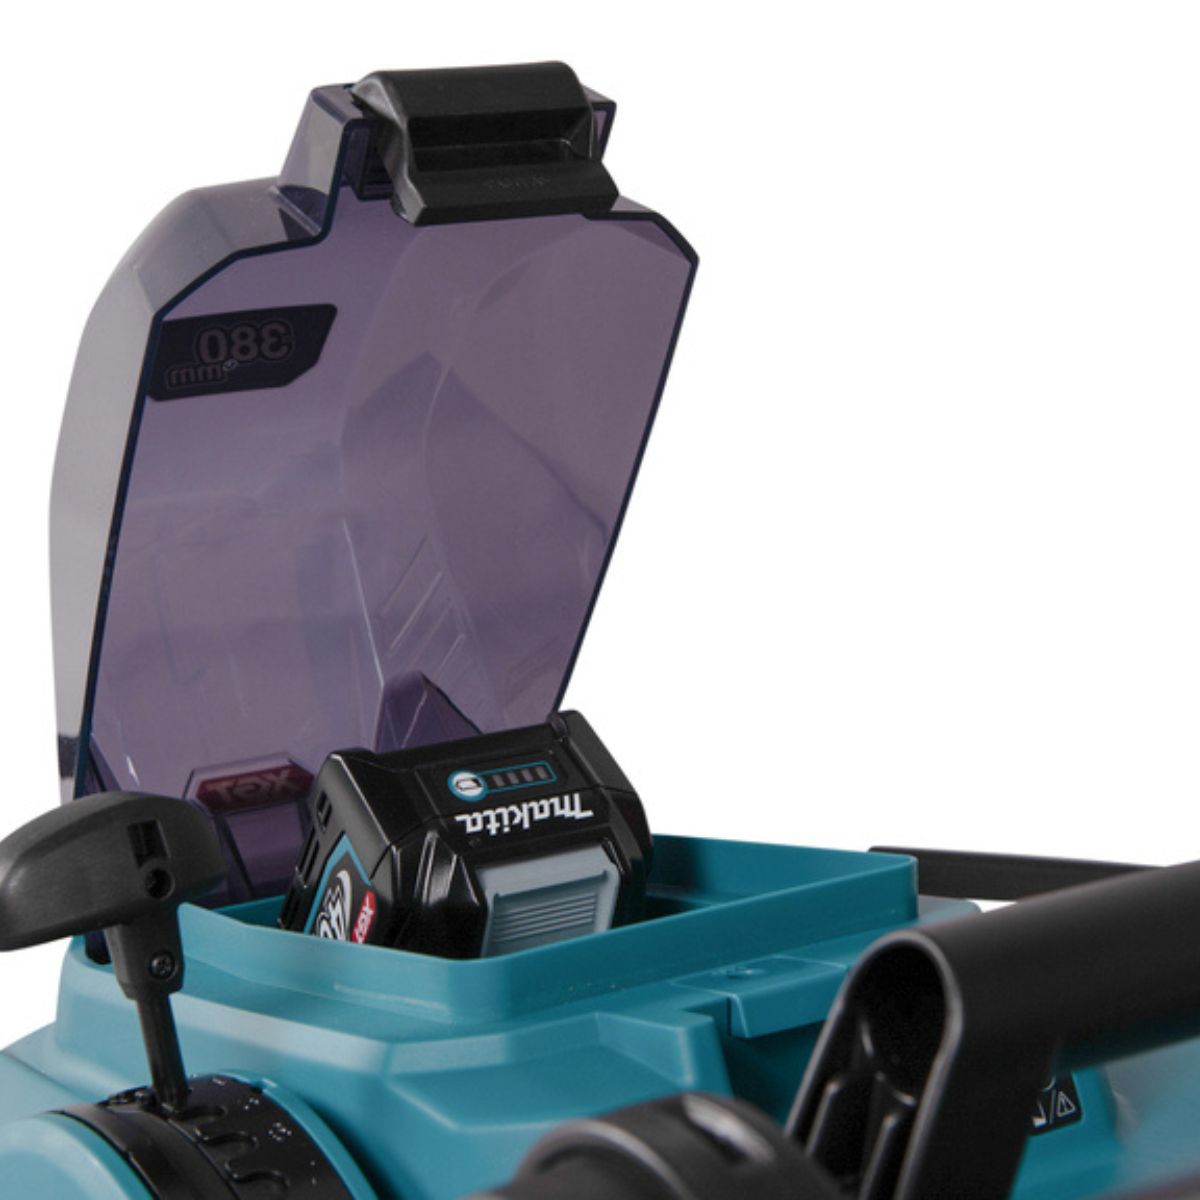 Makita LM003GM103 40V XGT Brushless 380mm (15″) Lawn Mower with 1 x 4.0Ah Battery & Charger